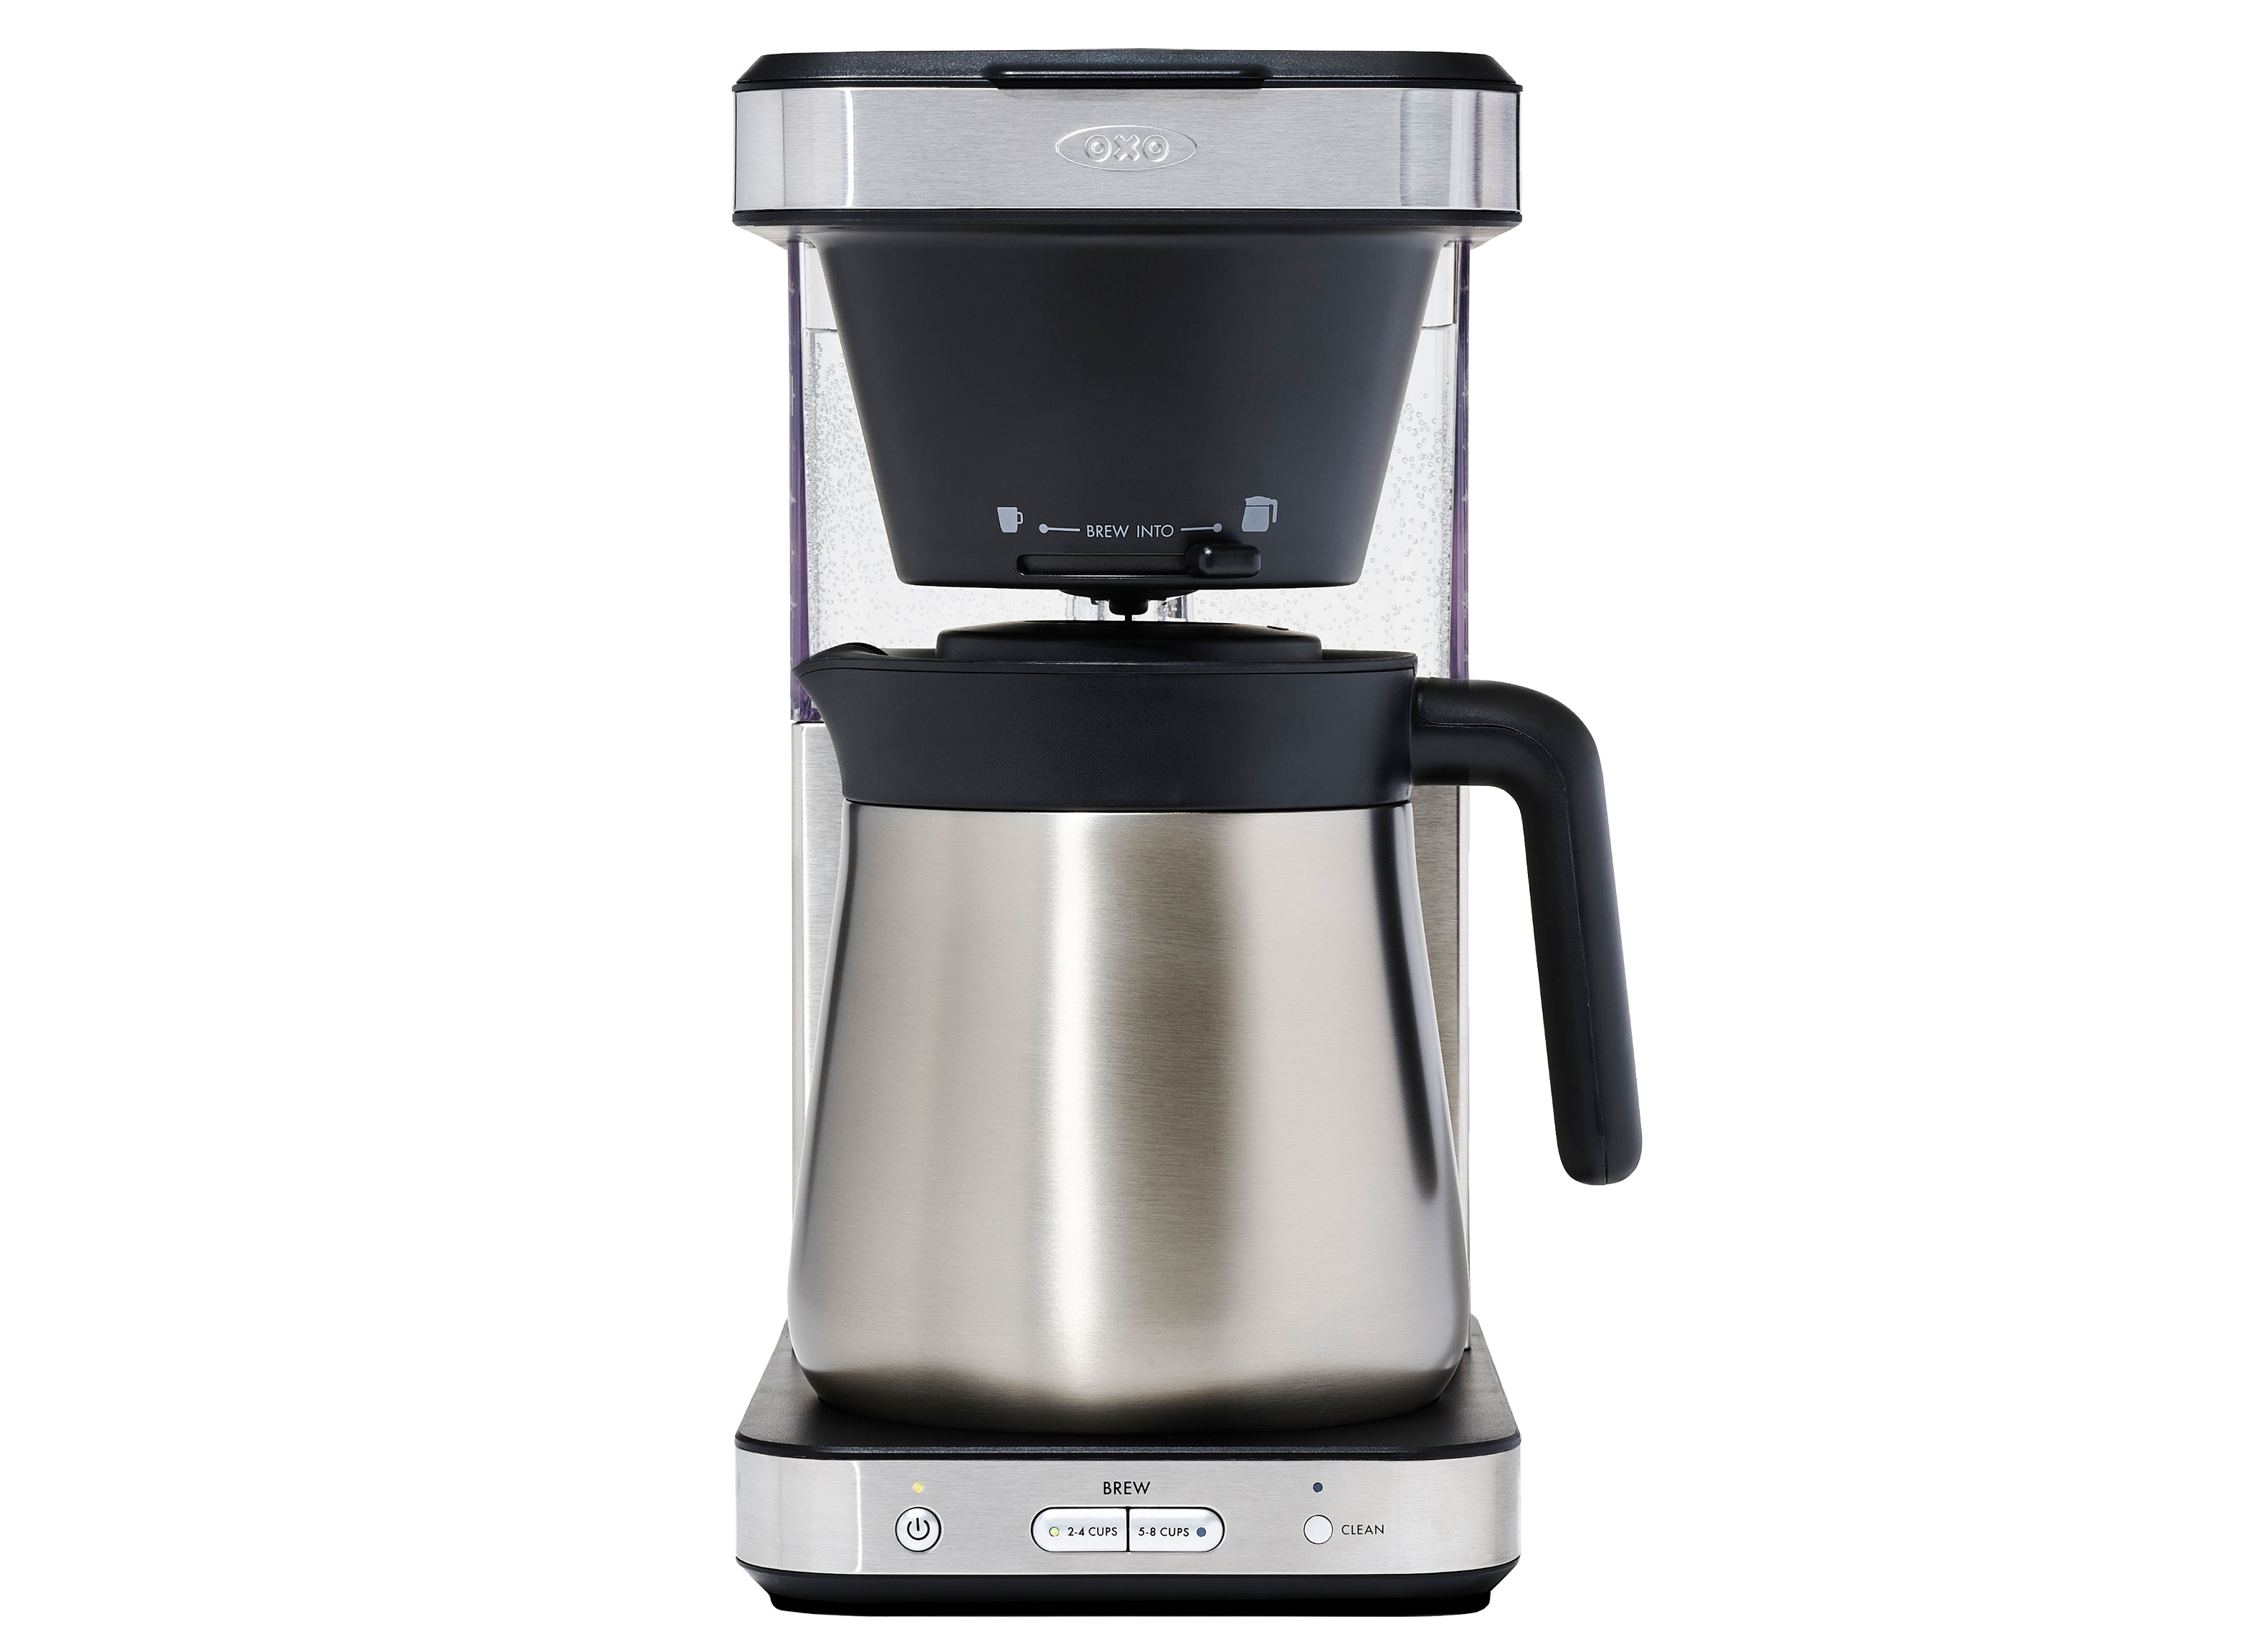 https://crdms.images.consumerreports.org/prod/products/cr/models/402117-drip-coffee-makers-with-carafe-oxo-8-cup-8718800-10015731.png